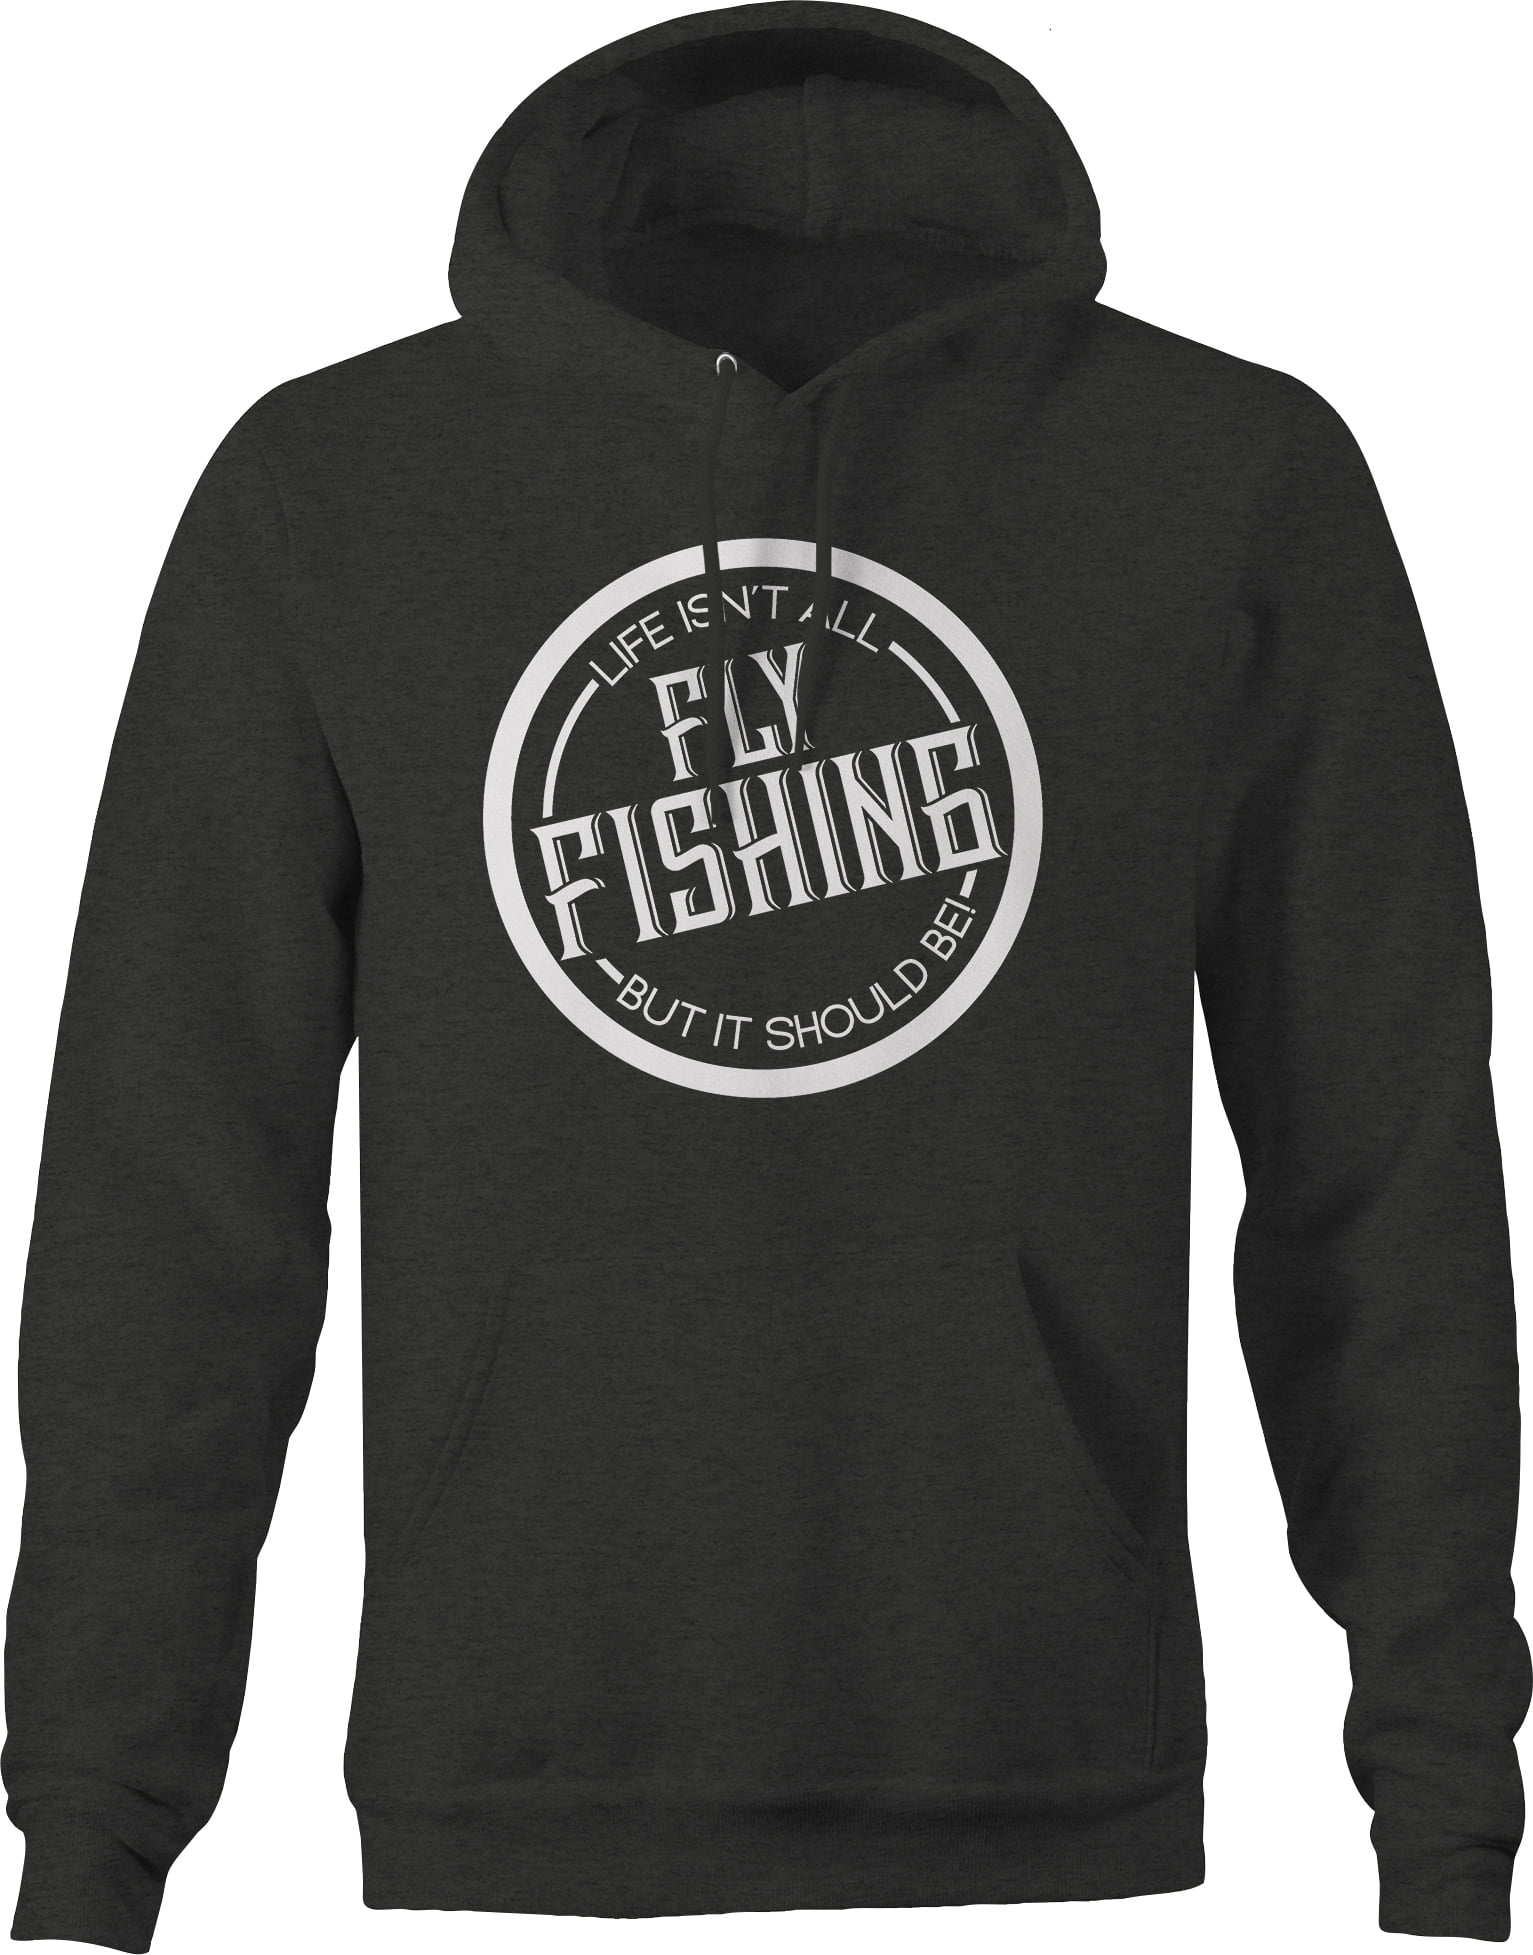 LIFE IS FULL OF IMPORTANT CHOICES fly fishing' Men's Hoodie